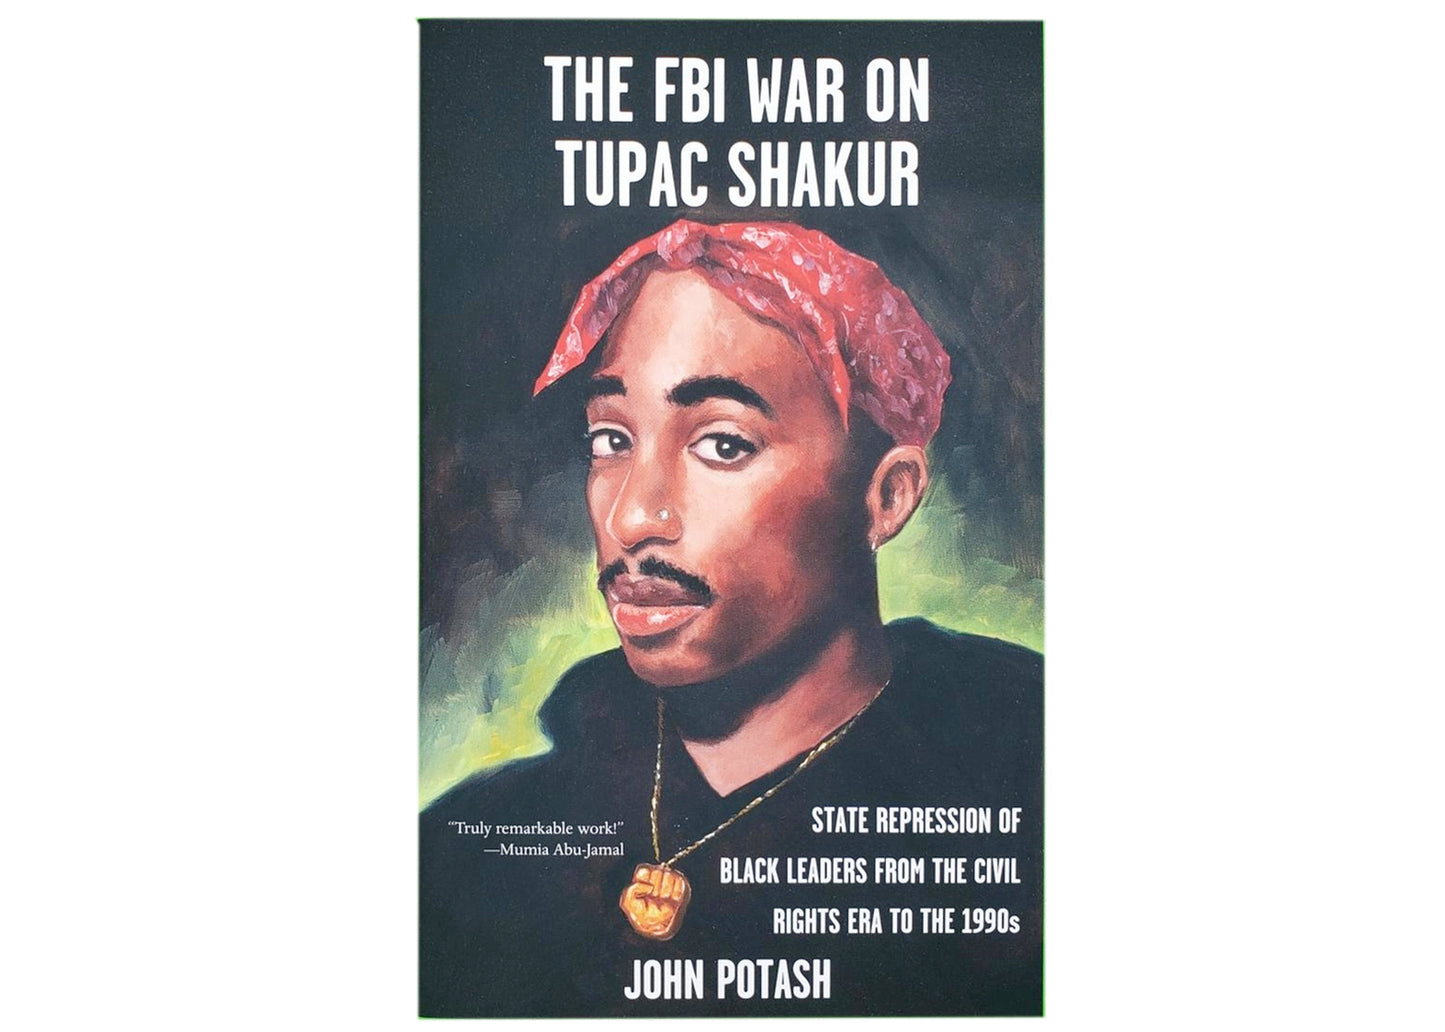 The FBI War on Tupac Shakur: The State Repression of Black Leaders from the Civil Rights Era to the 1990s Book